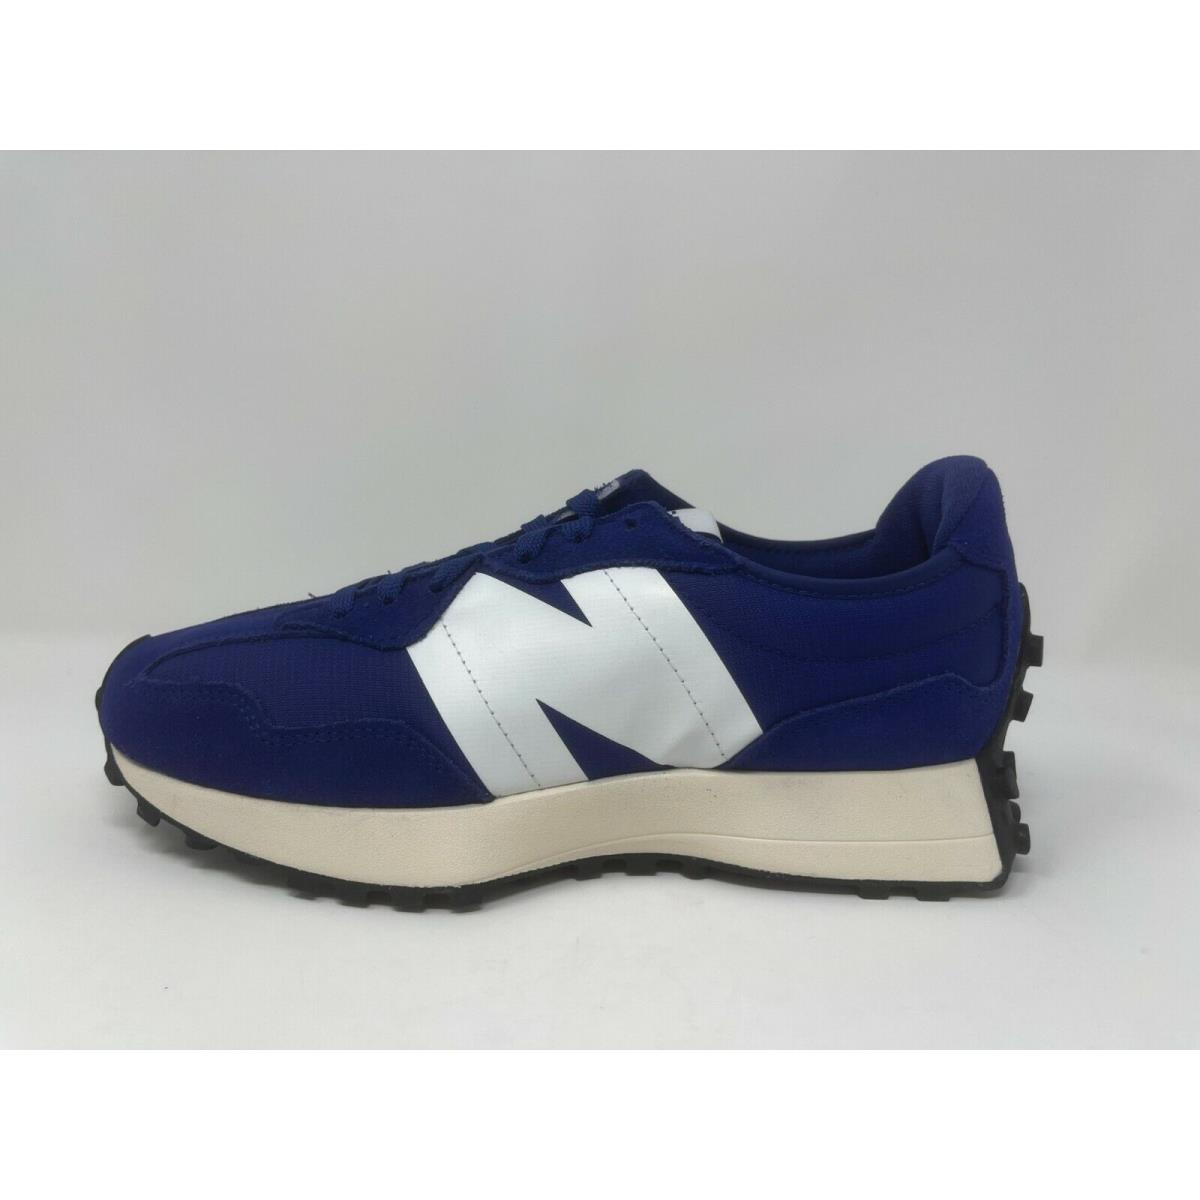 New Balance Men s 327 MS327GA Blue Suede Sneaker For Everyday Style Shoes